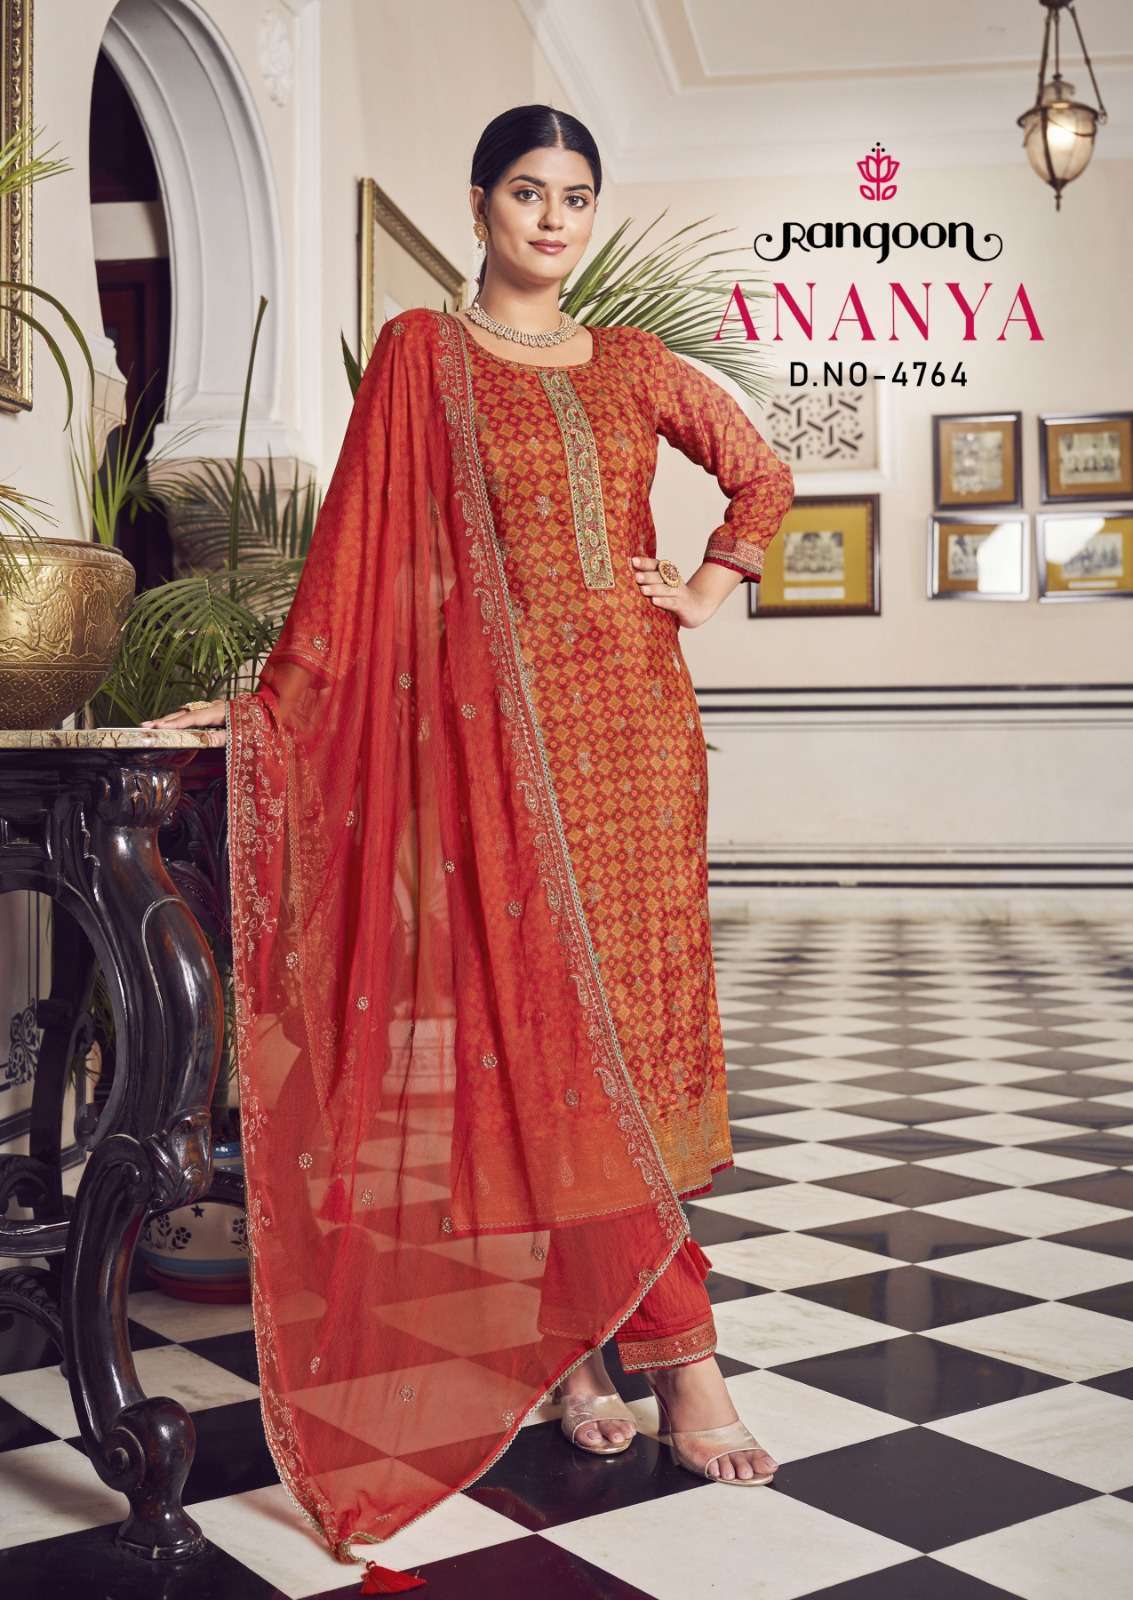 Rangoon Ananya Exclusive Trending Wear Ready Made Wholesale Manufactures in India